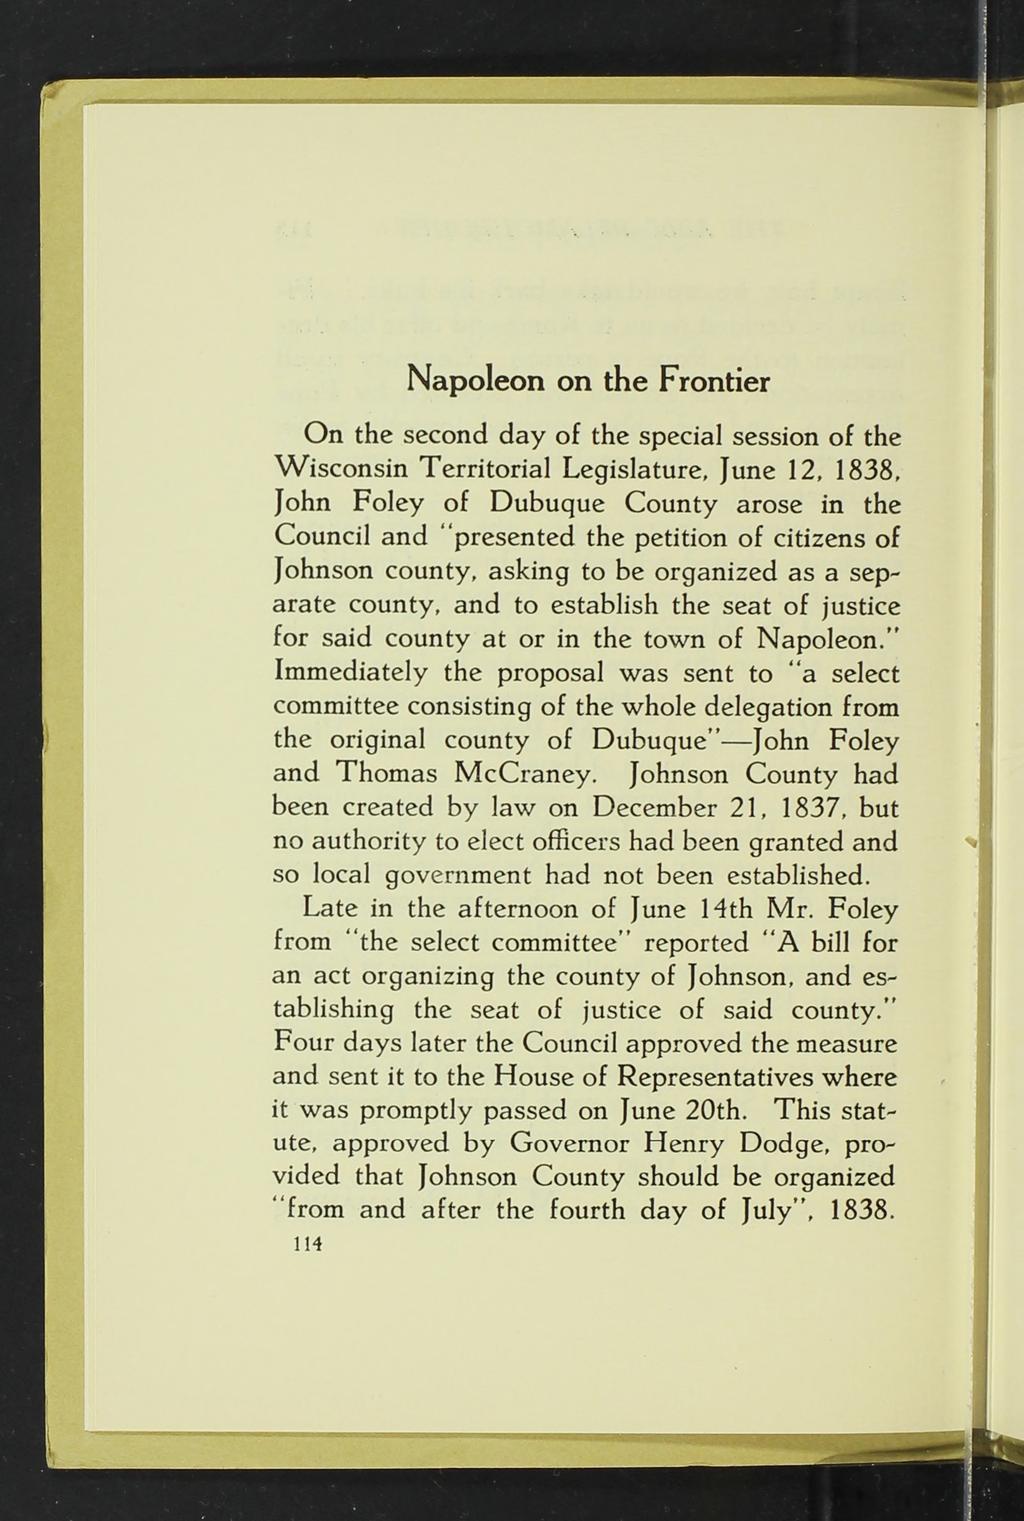 Napoleon on the Frontier On the second day of the special session of the Wisconsin Territorial Legislature, June 12, 1838, John Foley of Dubuque County arose in the Council and presented the petition